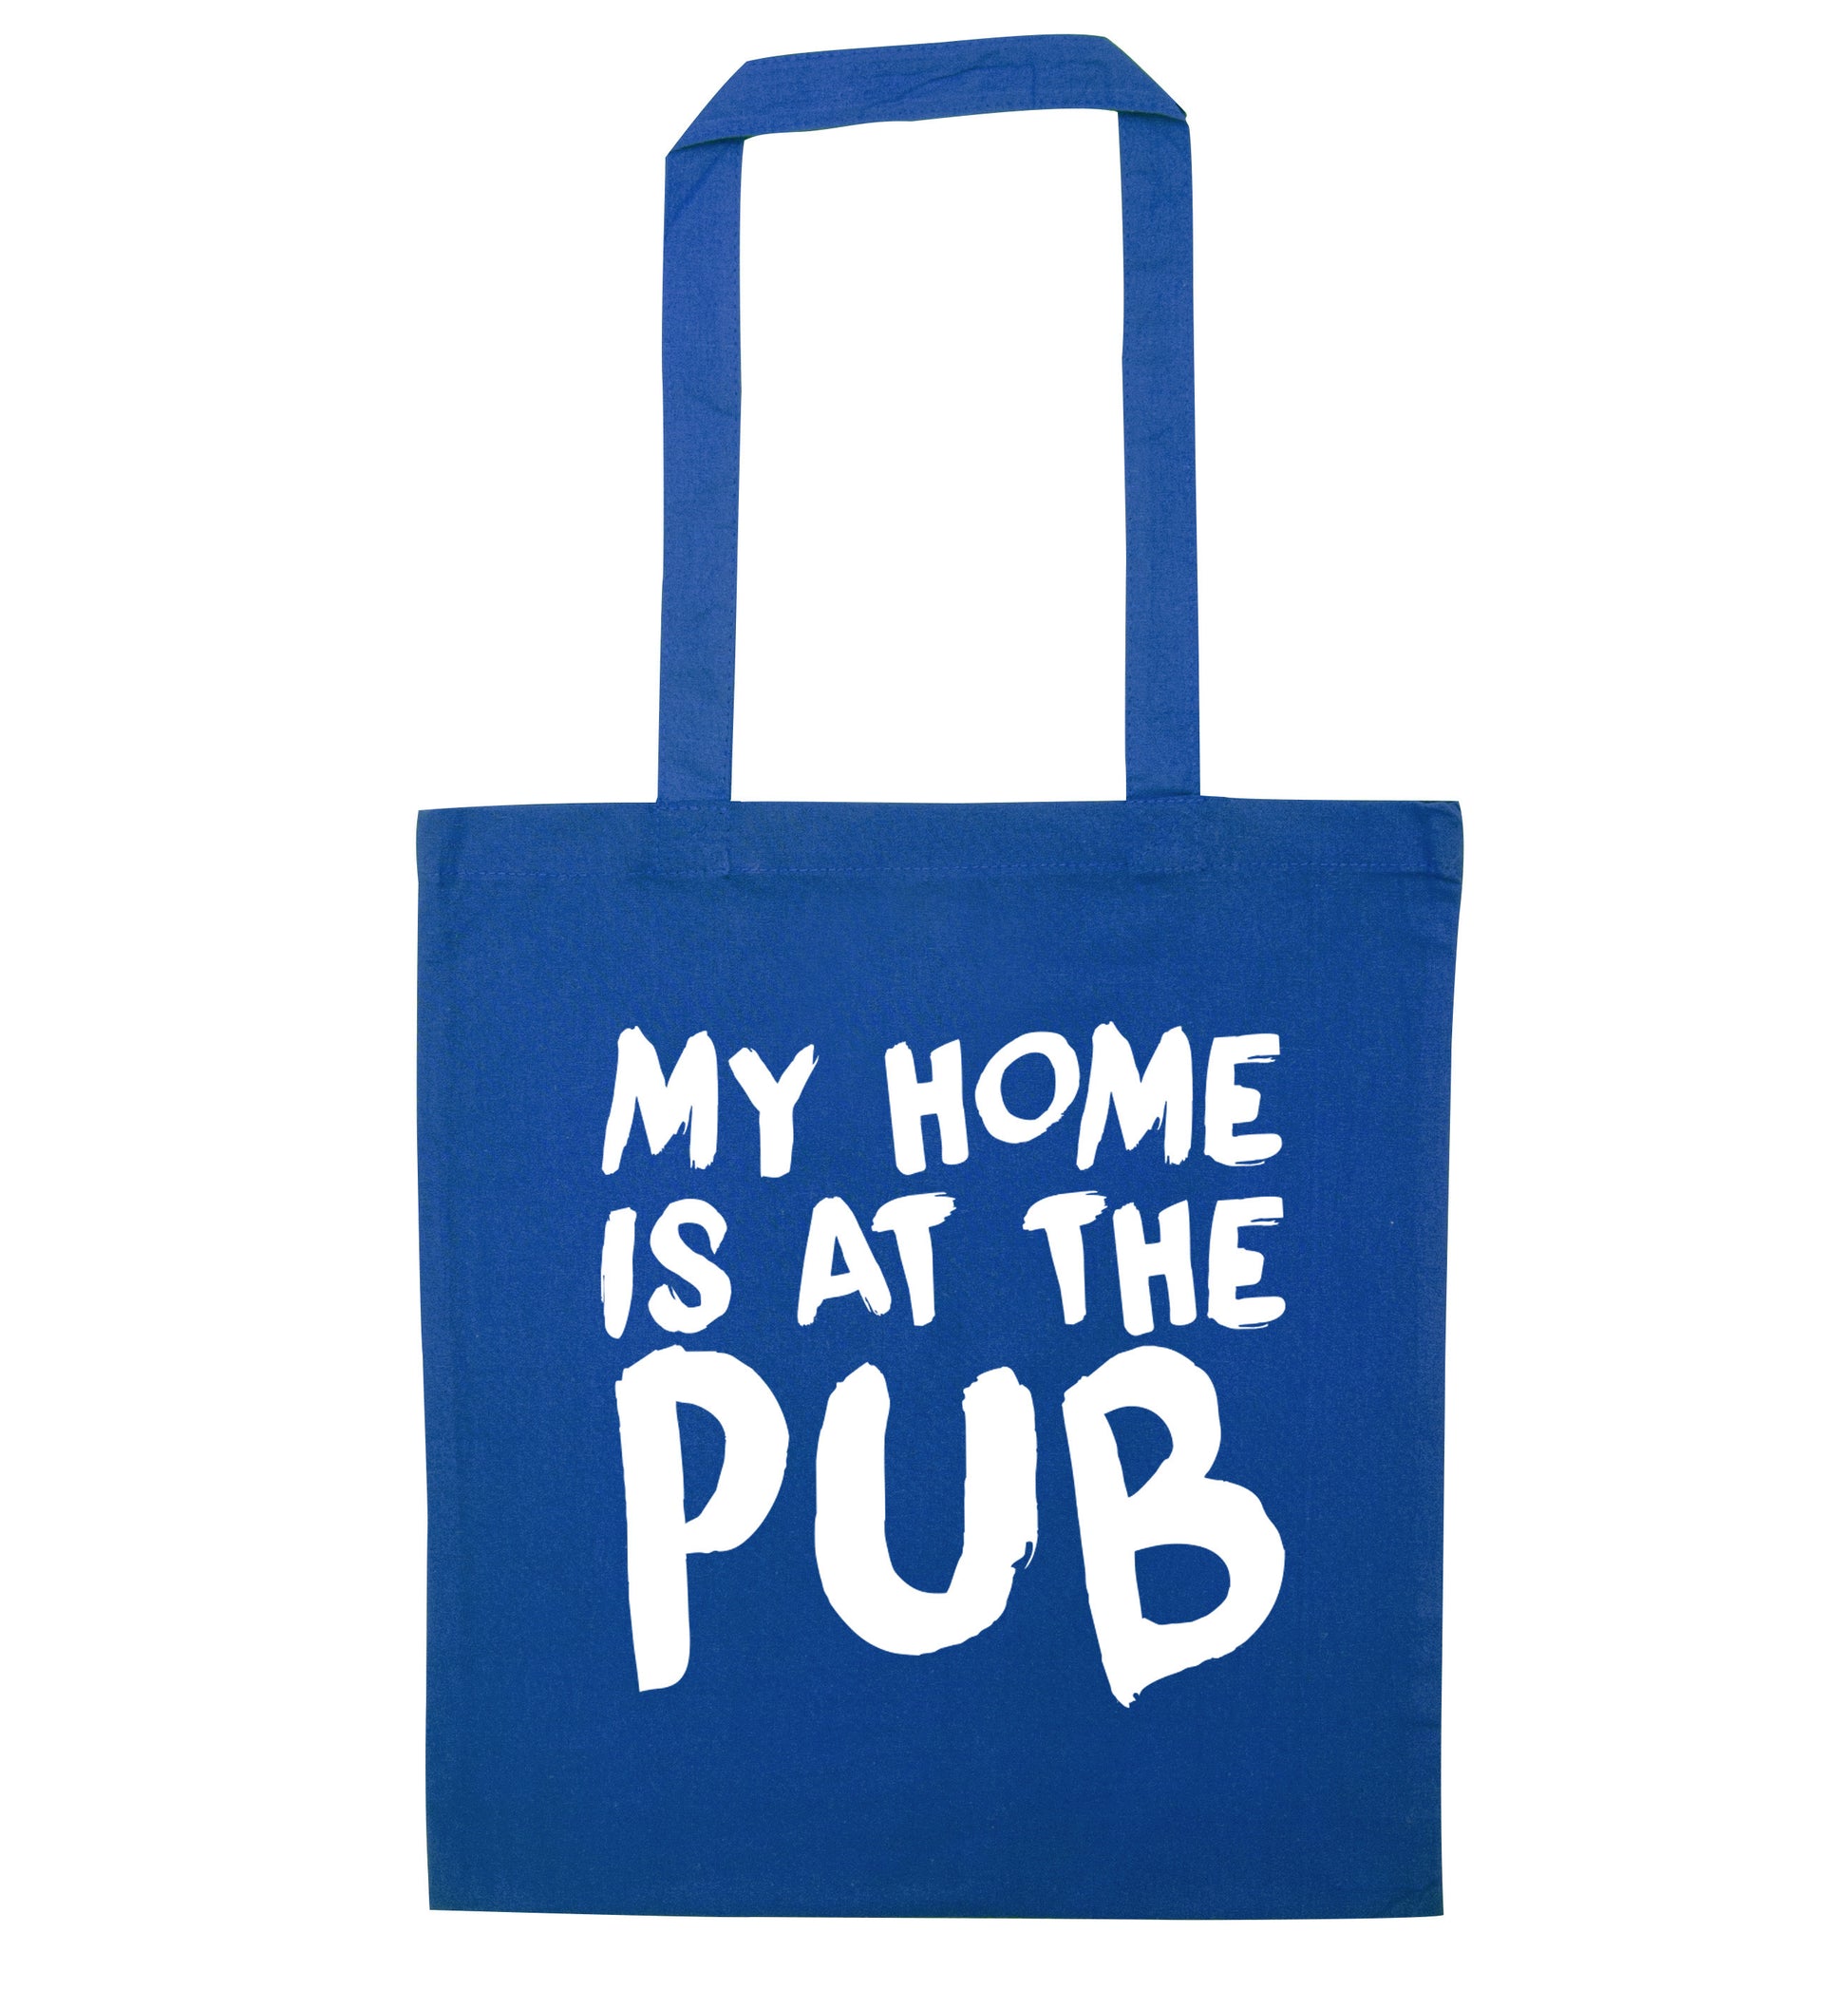 My home is at the pub blue tote bag